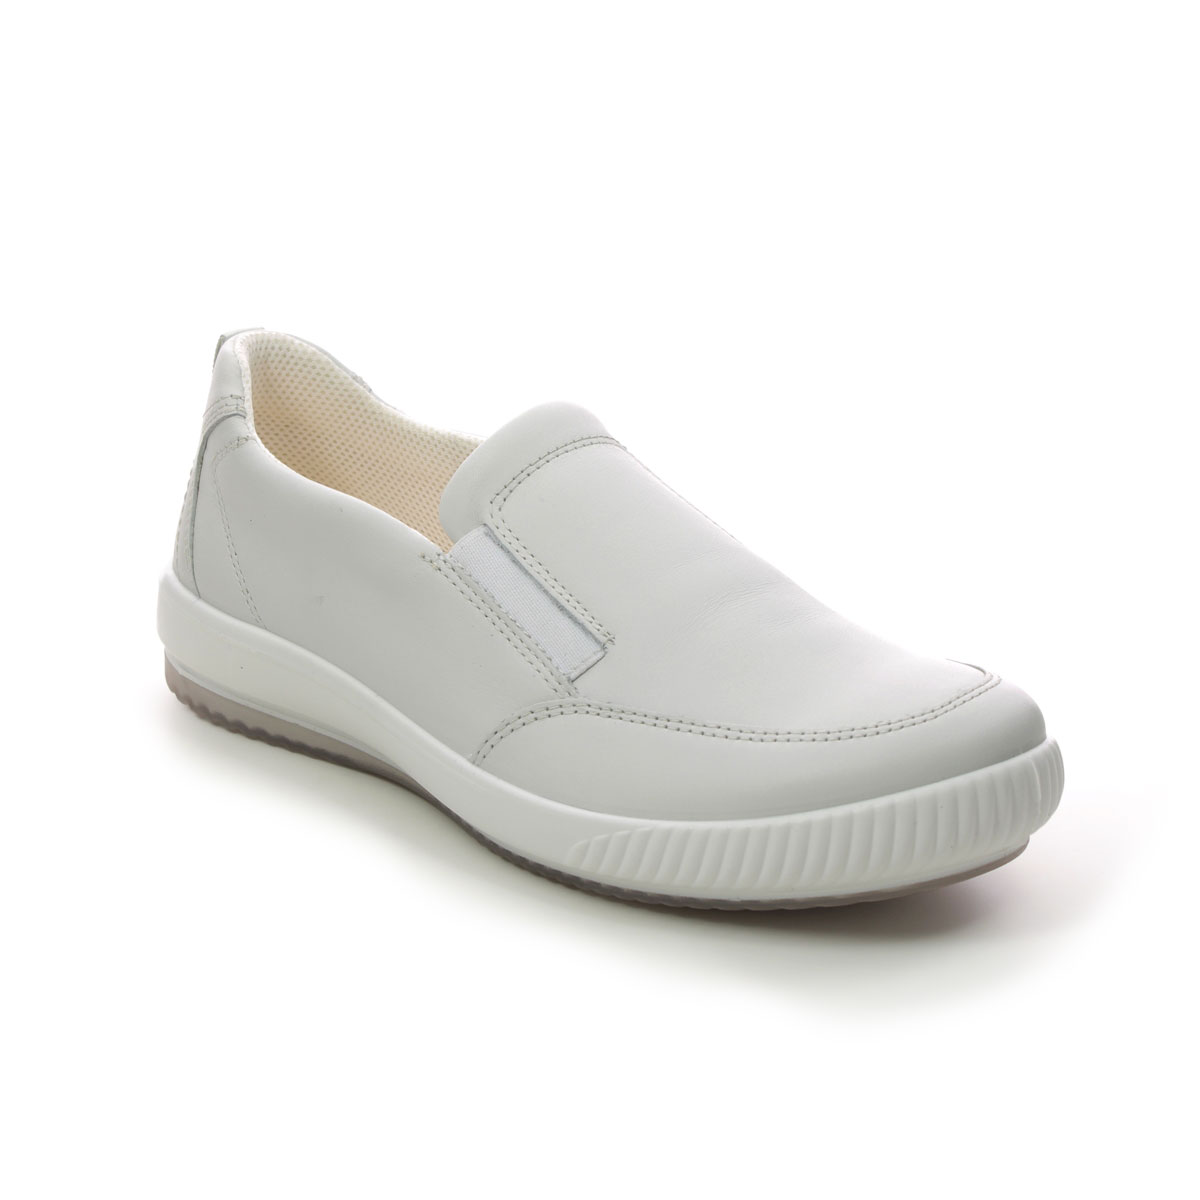 Legero Tanaro 5 Slip White Leather Womens Comfort Slip On Shoes 2000215-1000 In Size 6.5 In Plain White Leather